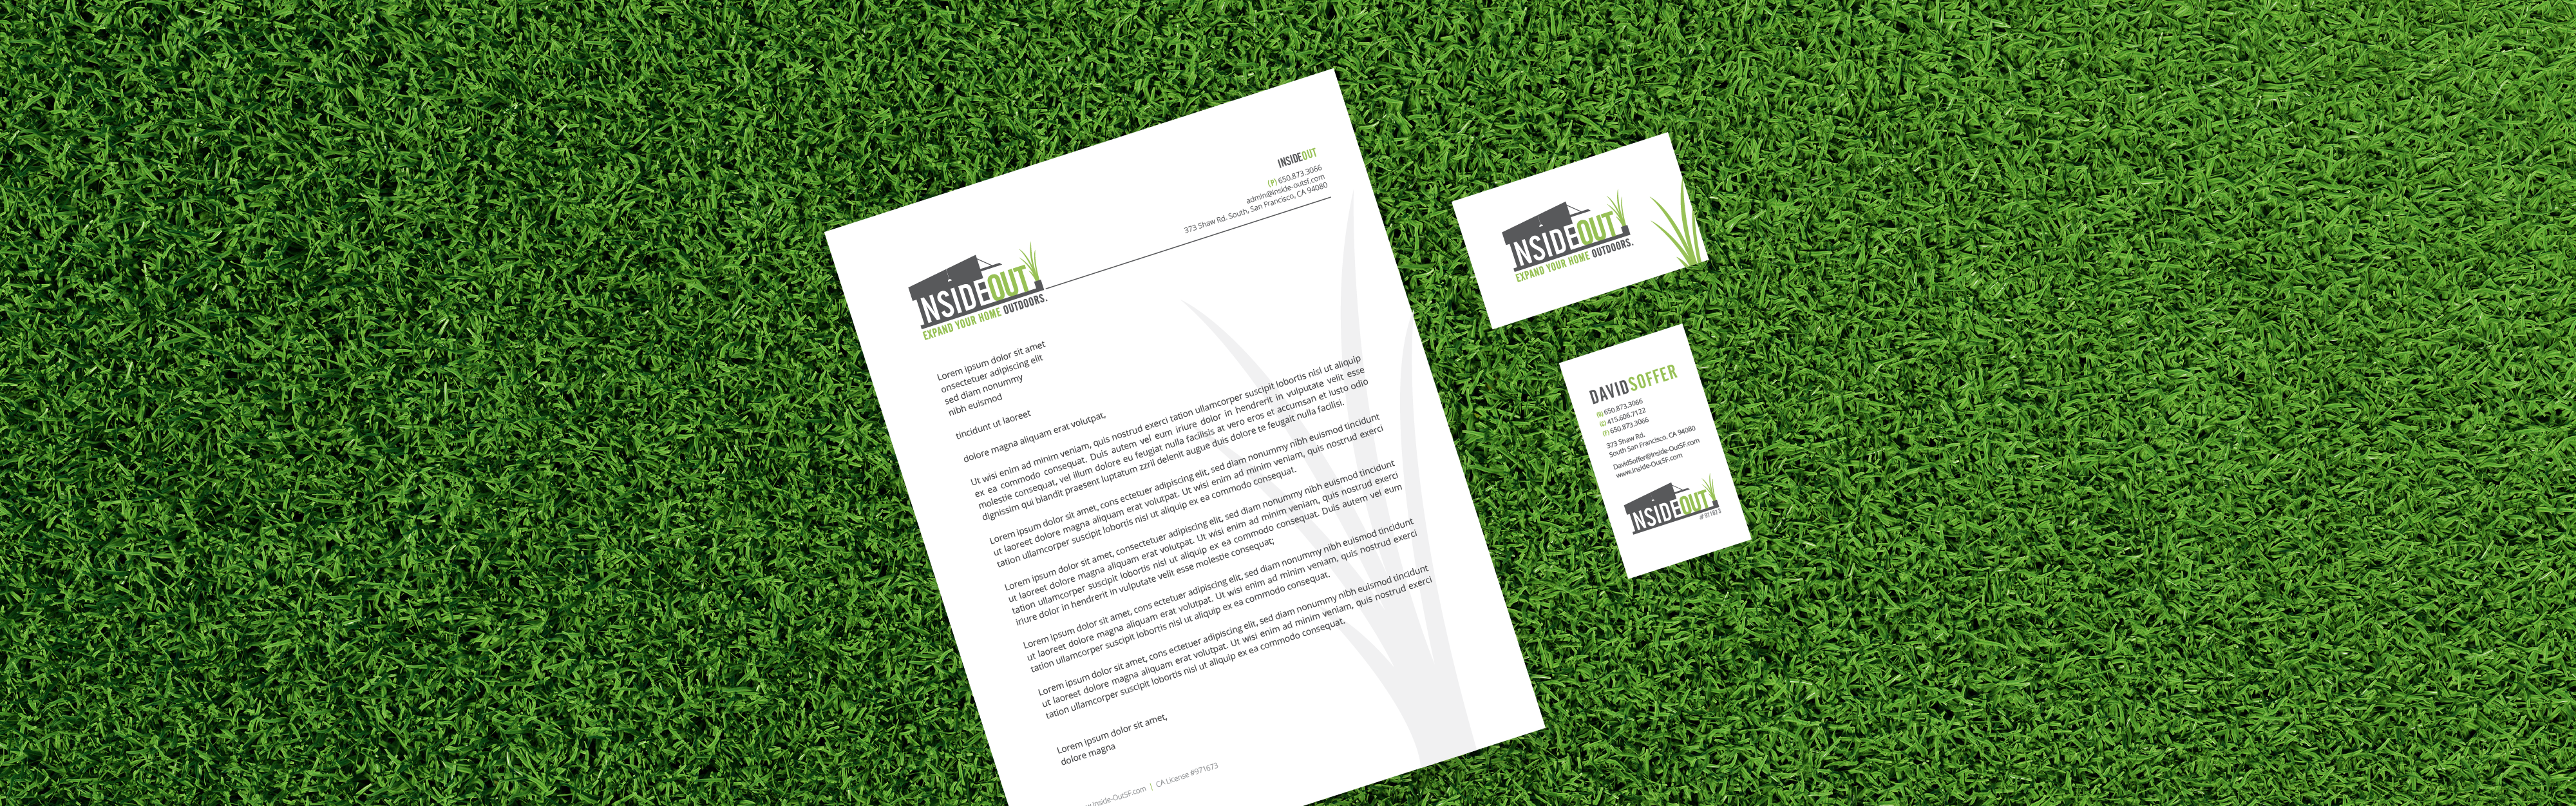 A set of printed corporate identity materials, including a letterhead, business cards, and a booklet or brochure, is displayed inside out on a green grass background.